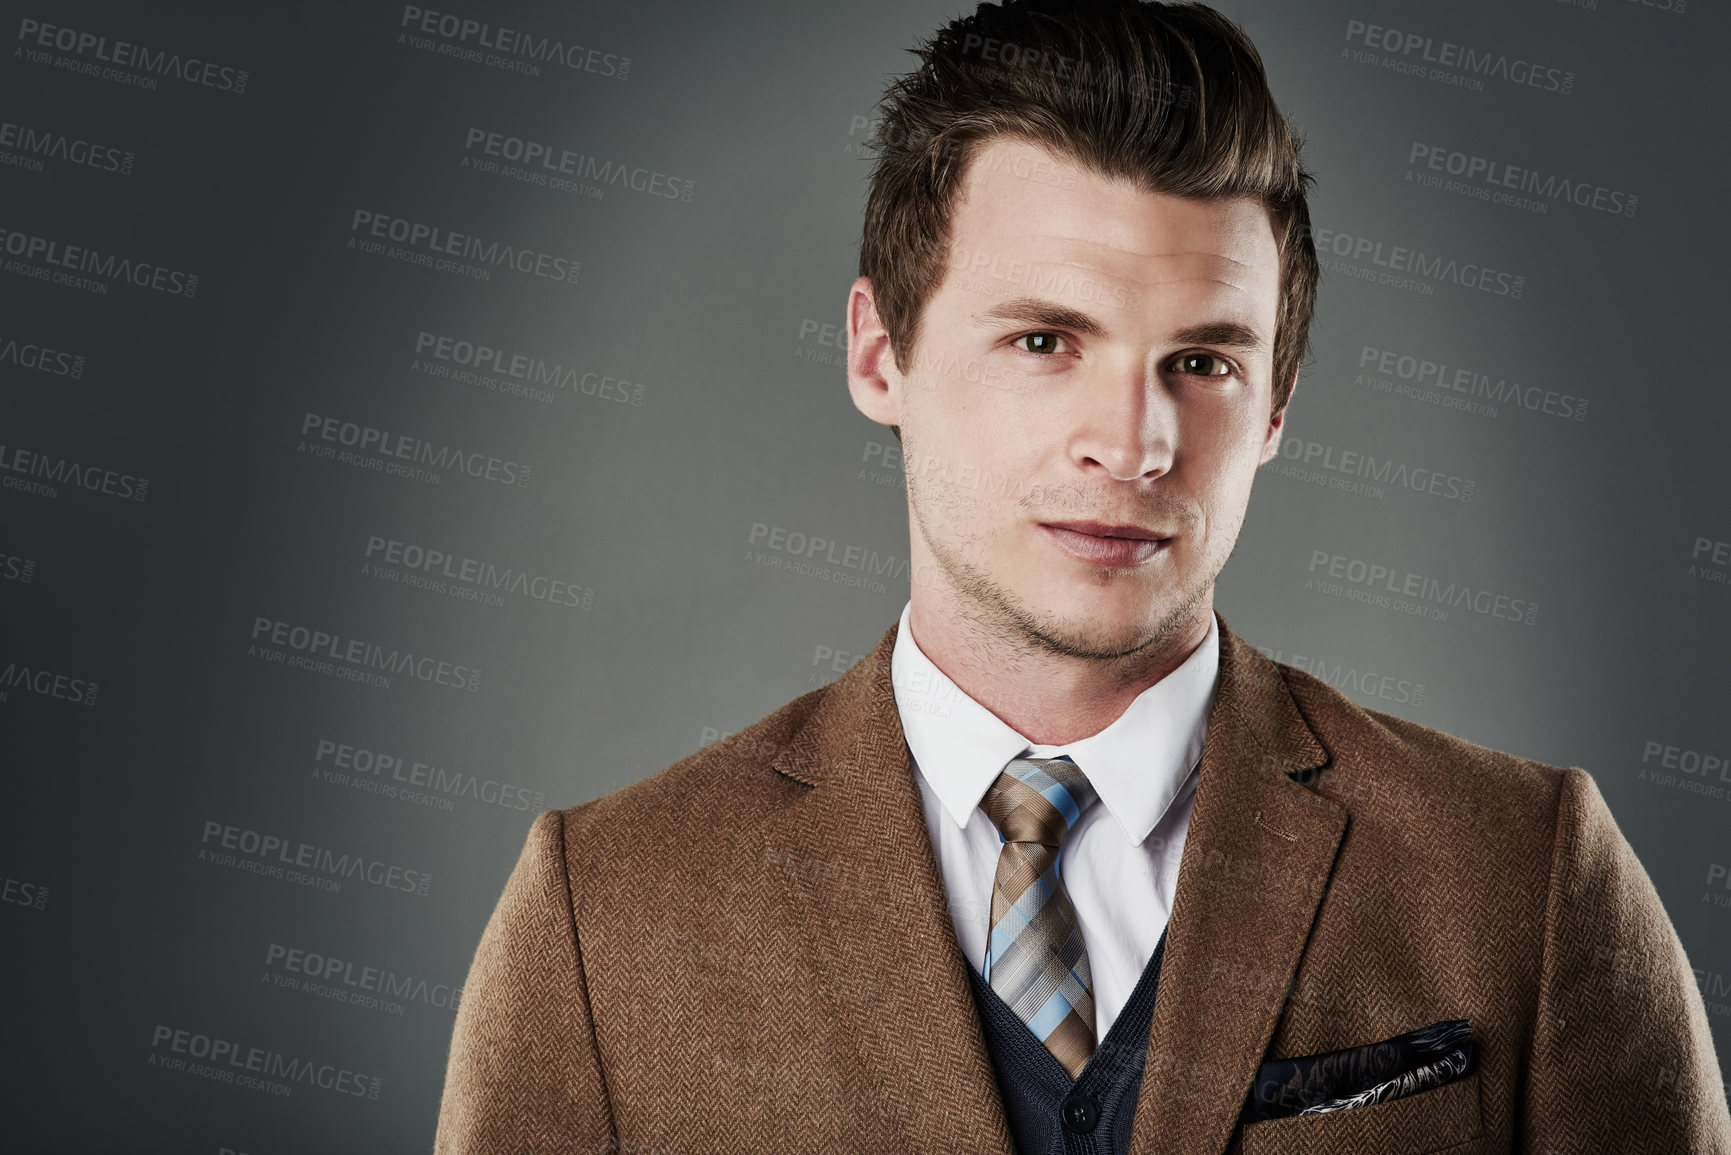 Buy stock photo Cropped shot of a young businessman posing against a grey background